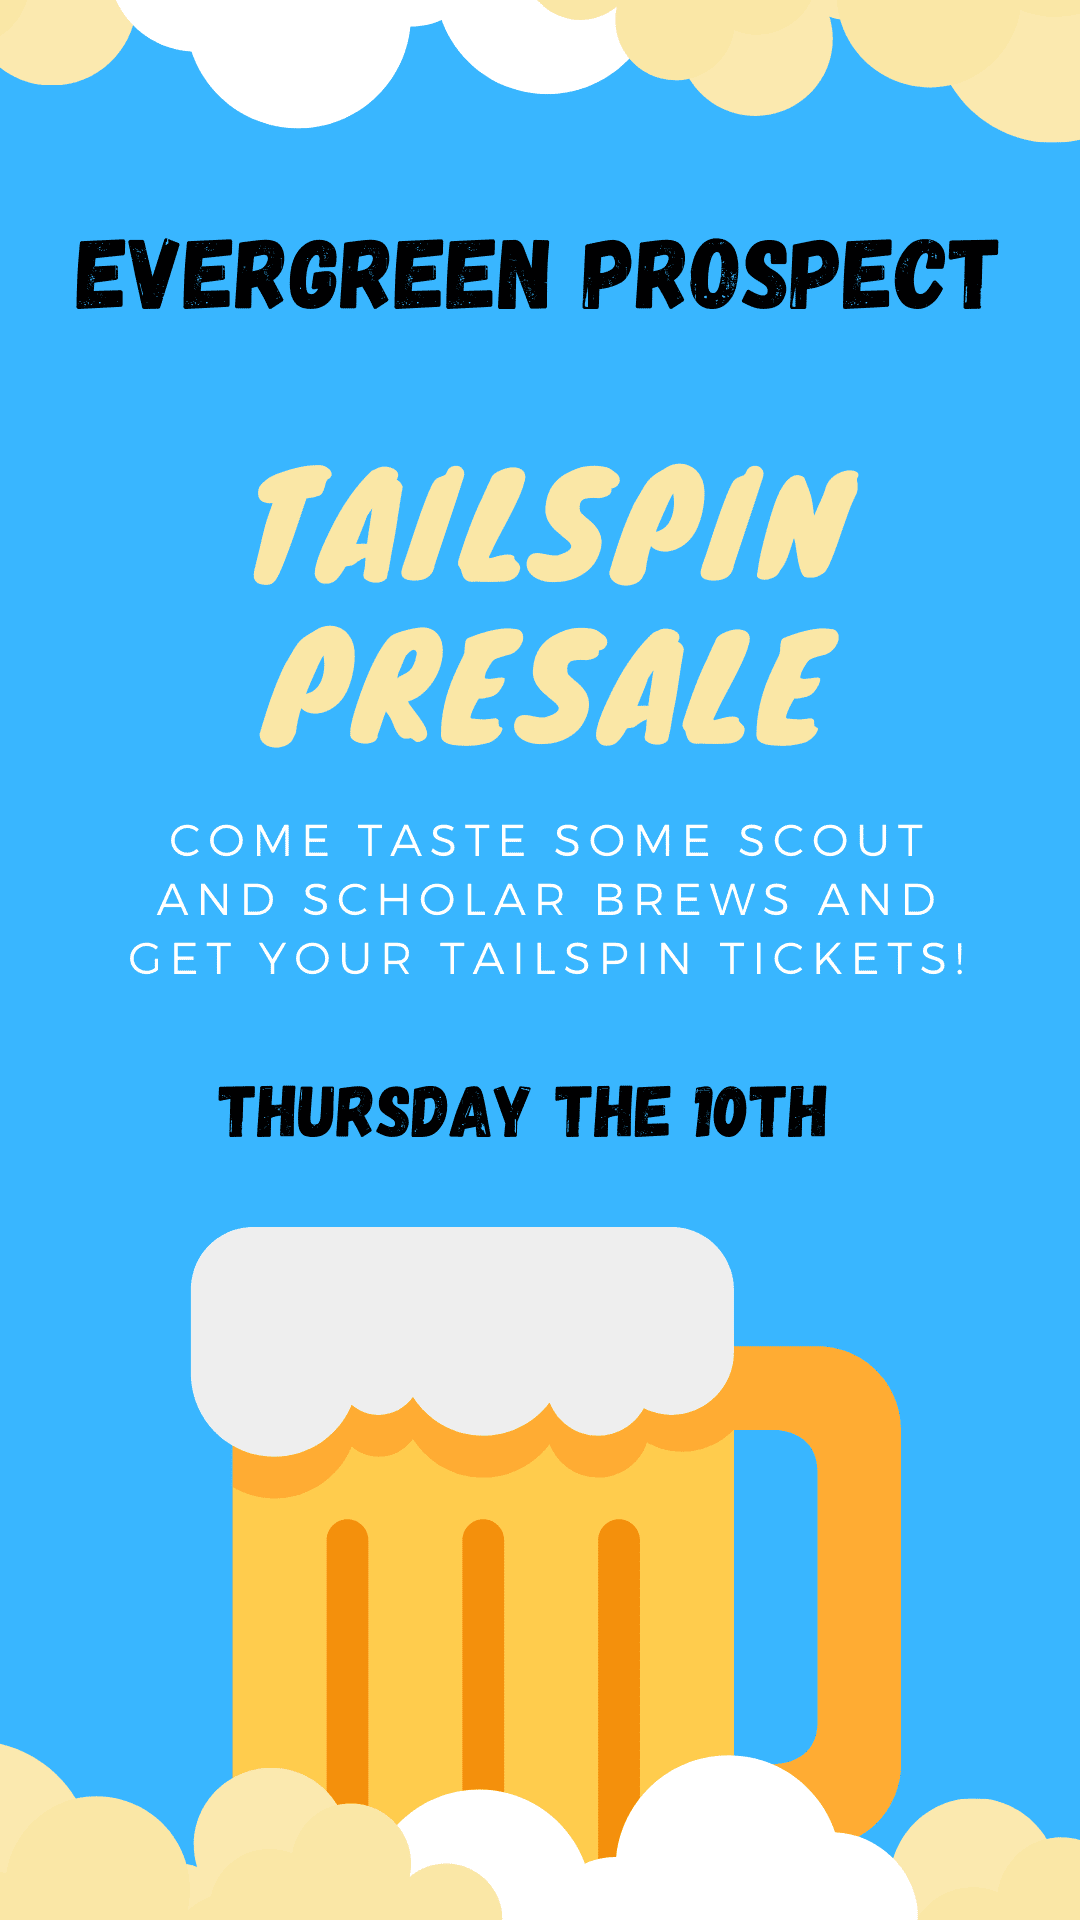 Tailspin Prospect